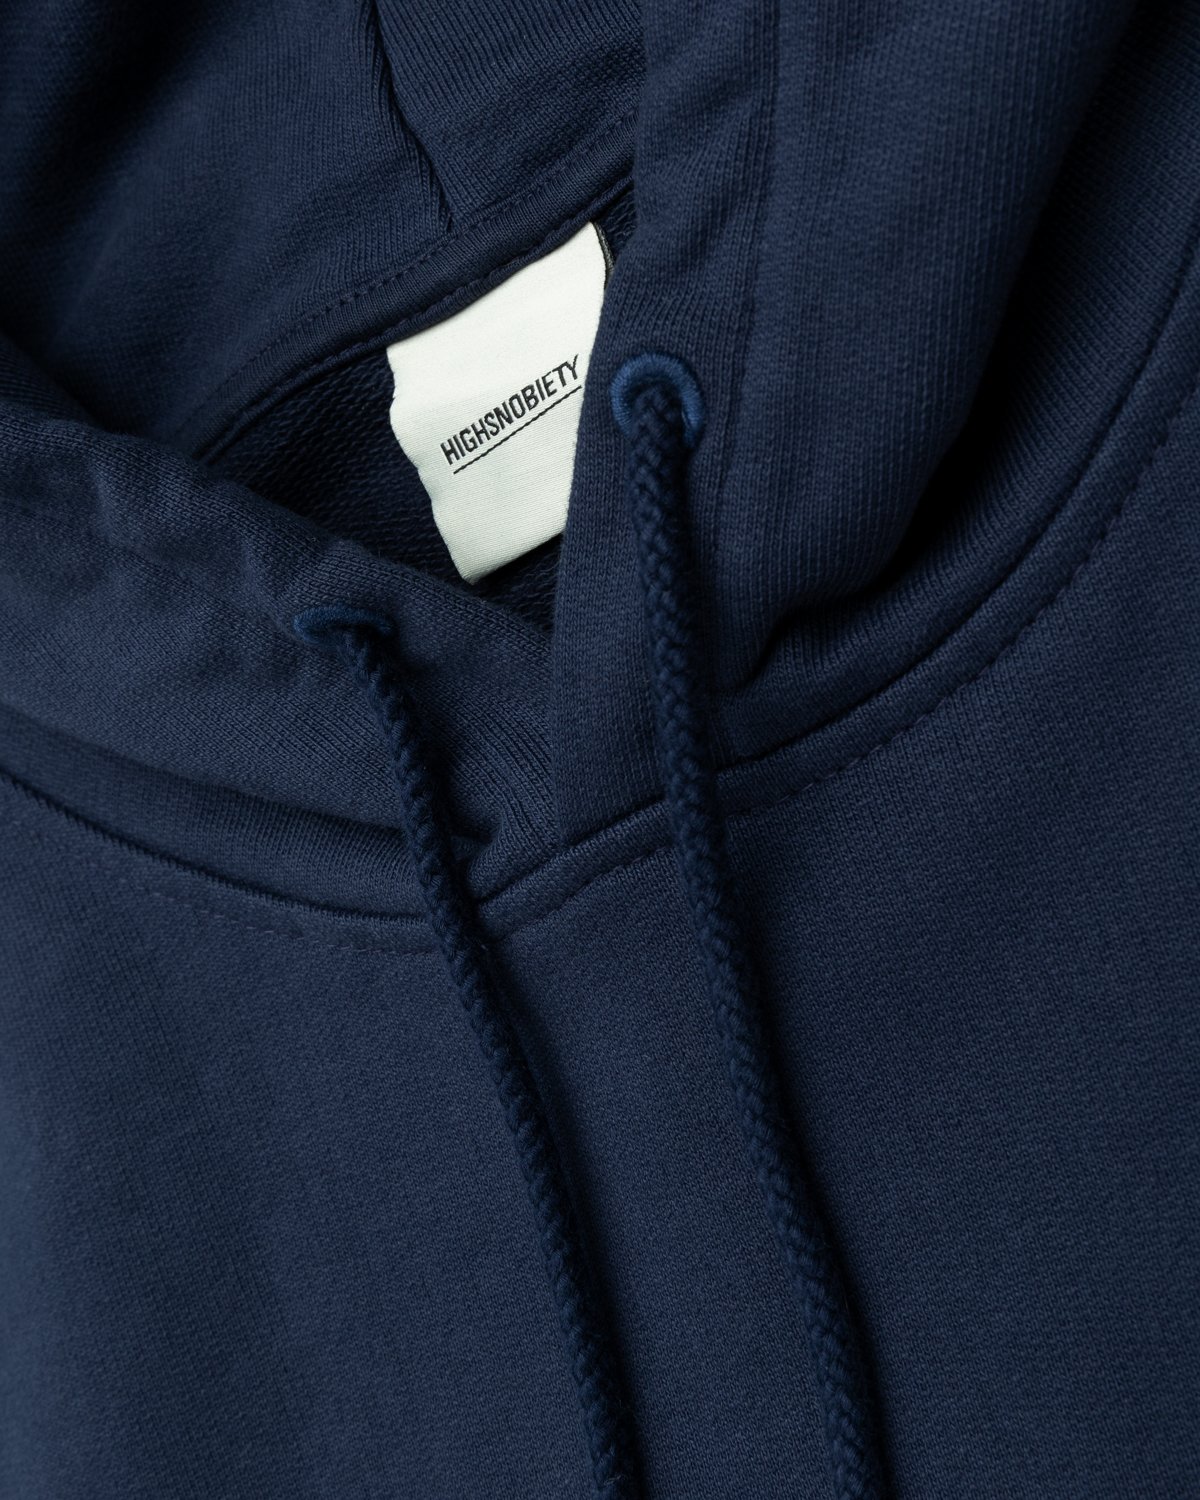 Highsnobiety - Flags Hoodie Navy - Clothing - Blue - Image 6